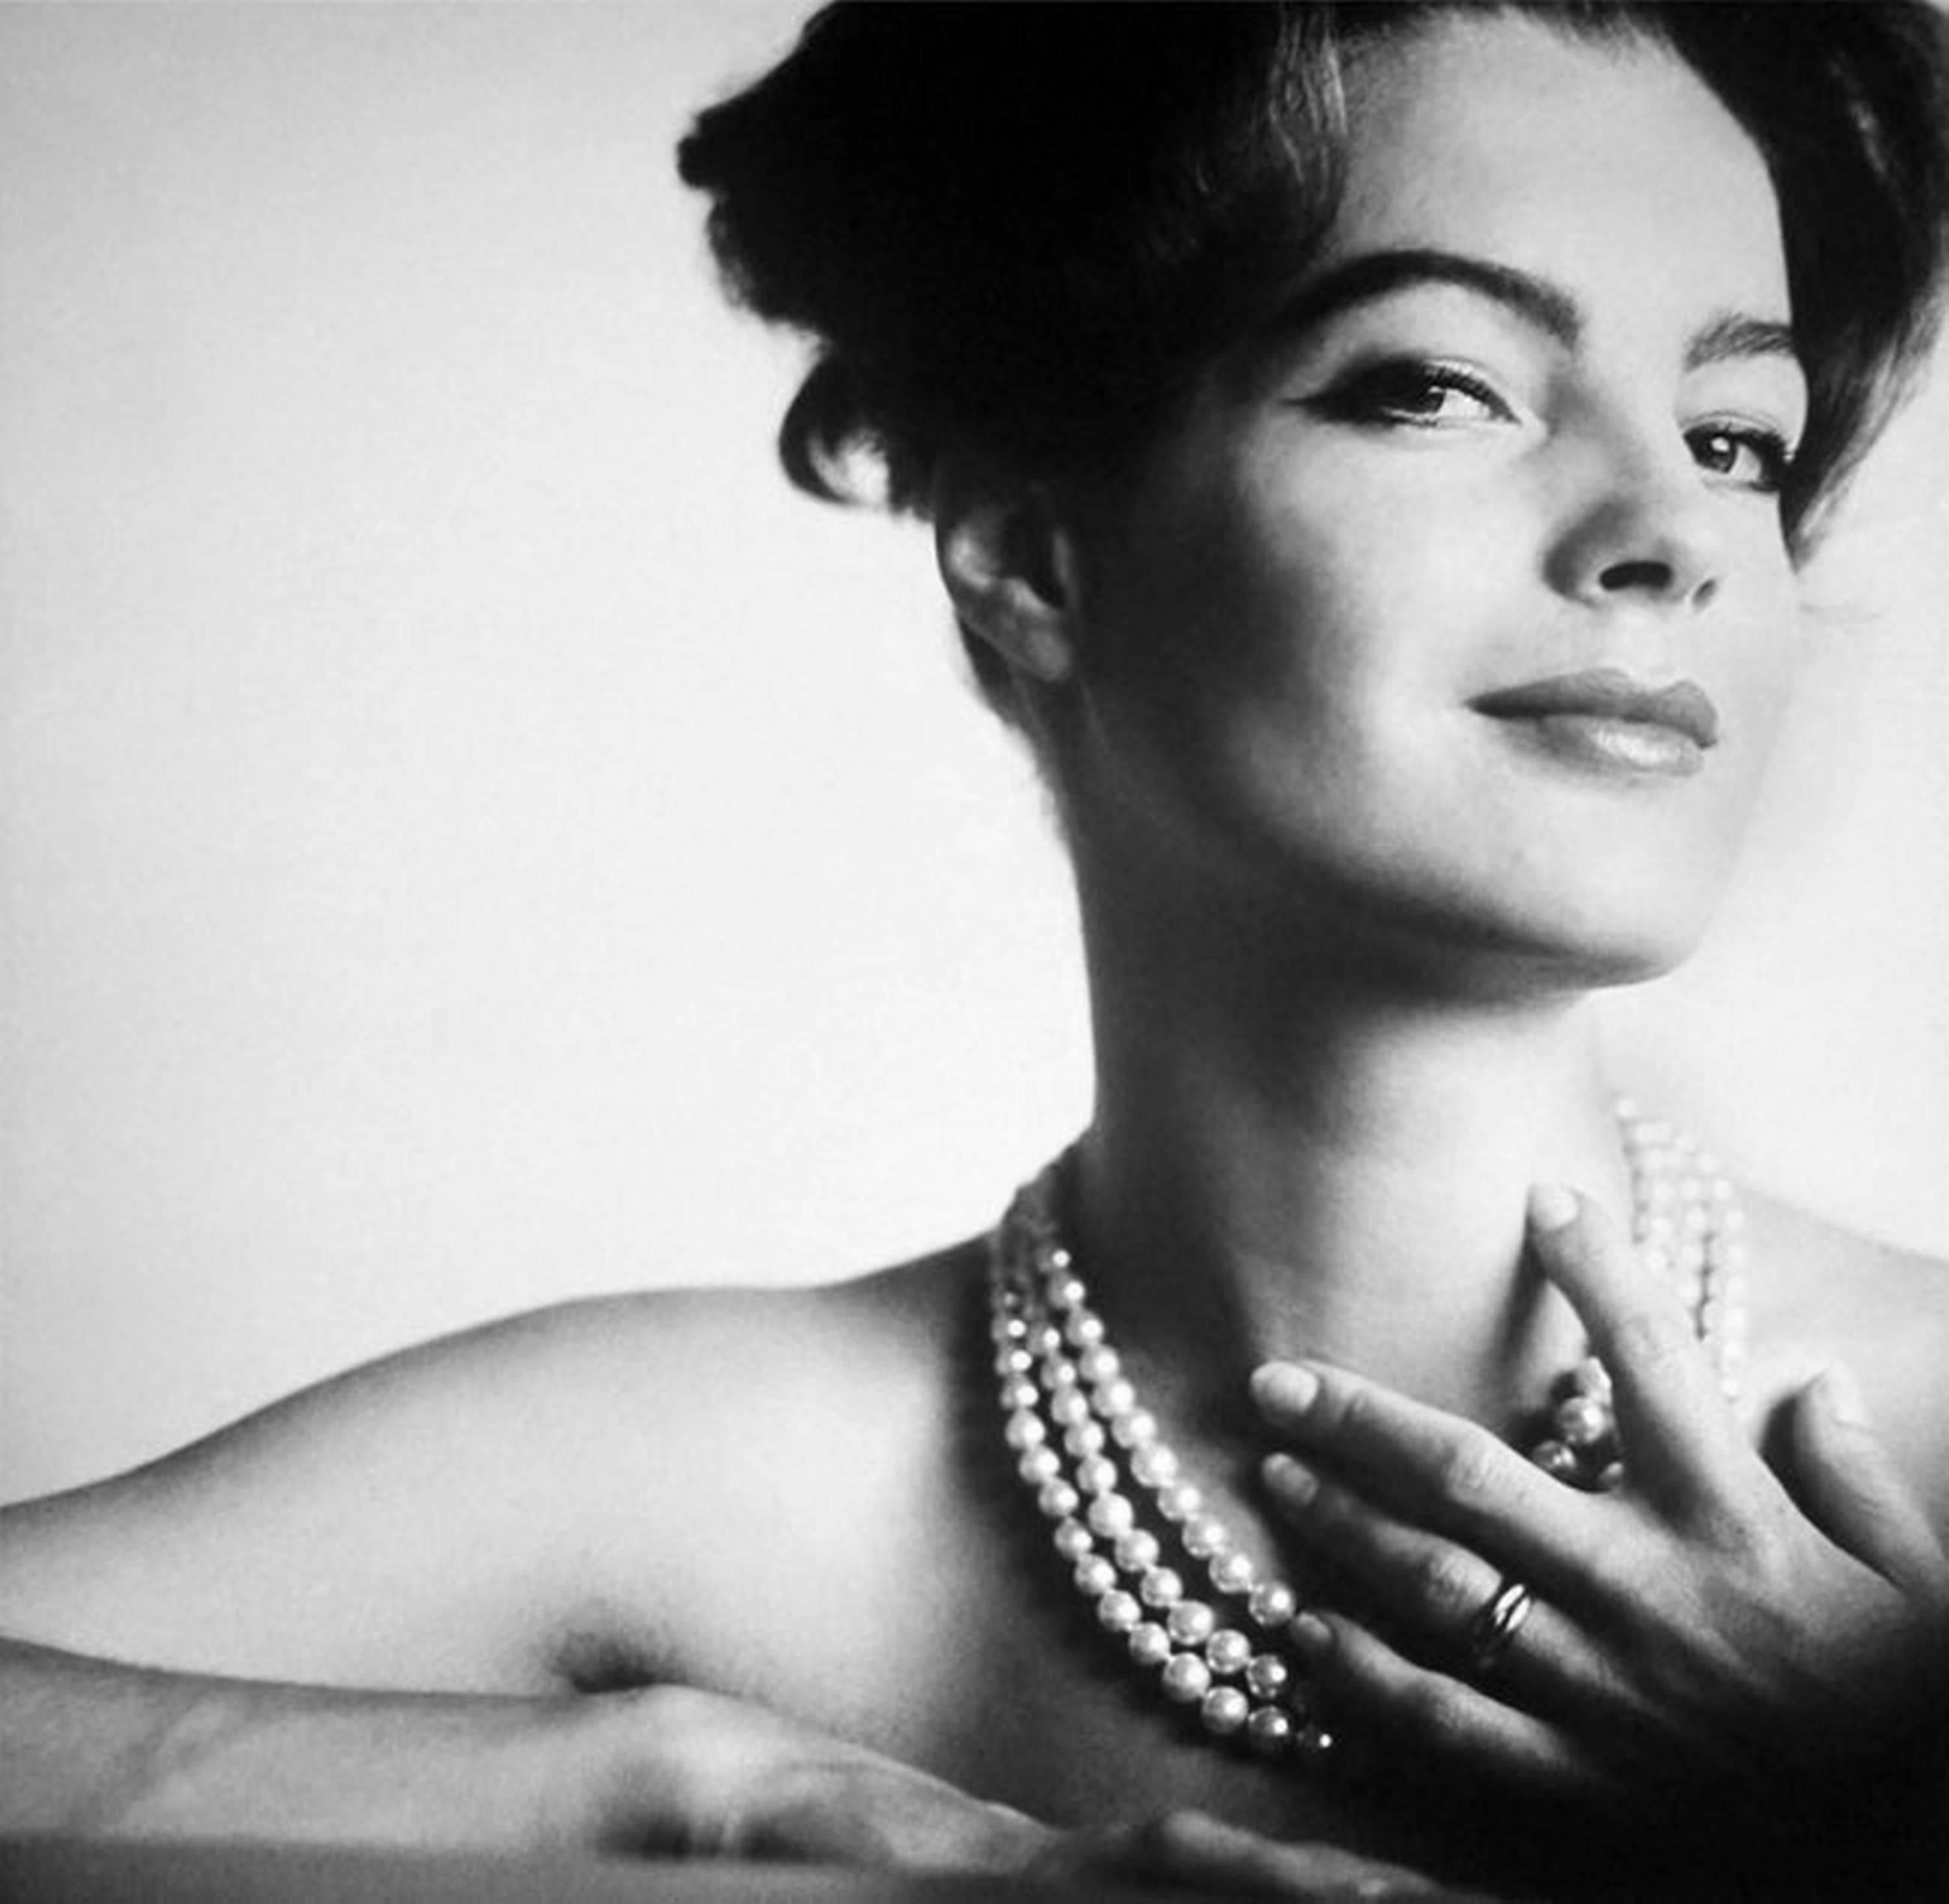 Douglas Kirkland Black and White Photograph - Portrait of romy schneider, almost naked only with a pearl necklace touching her